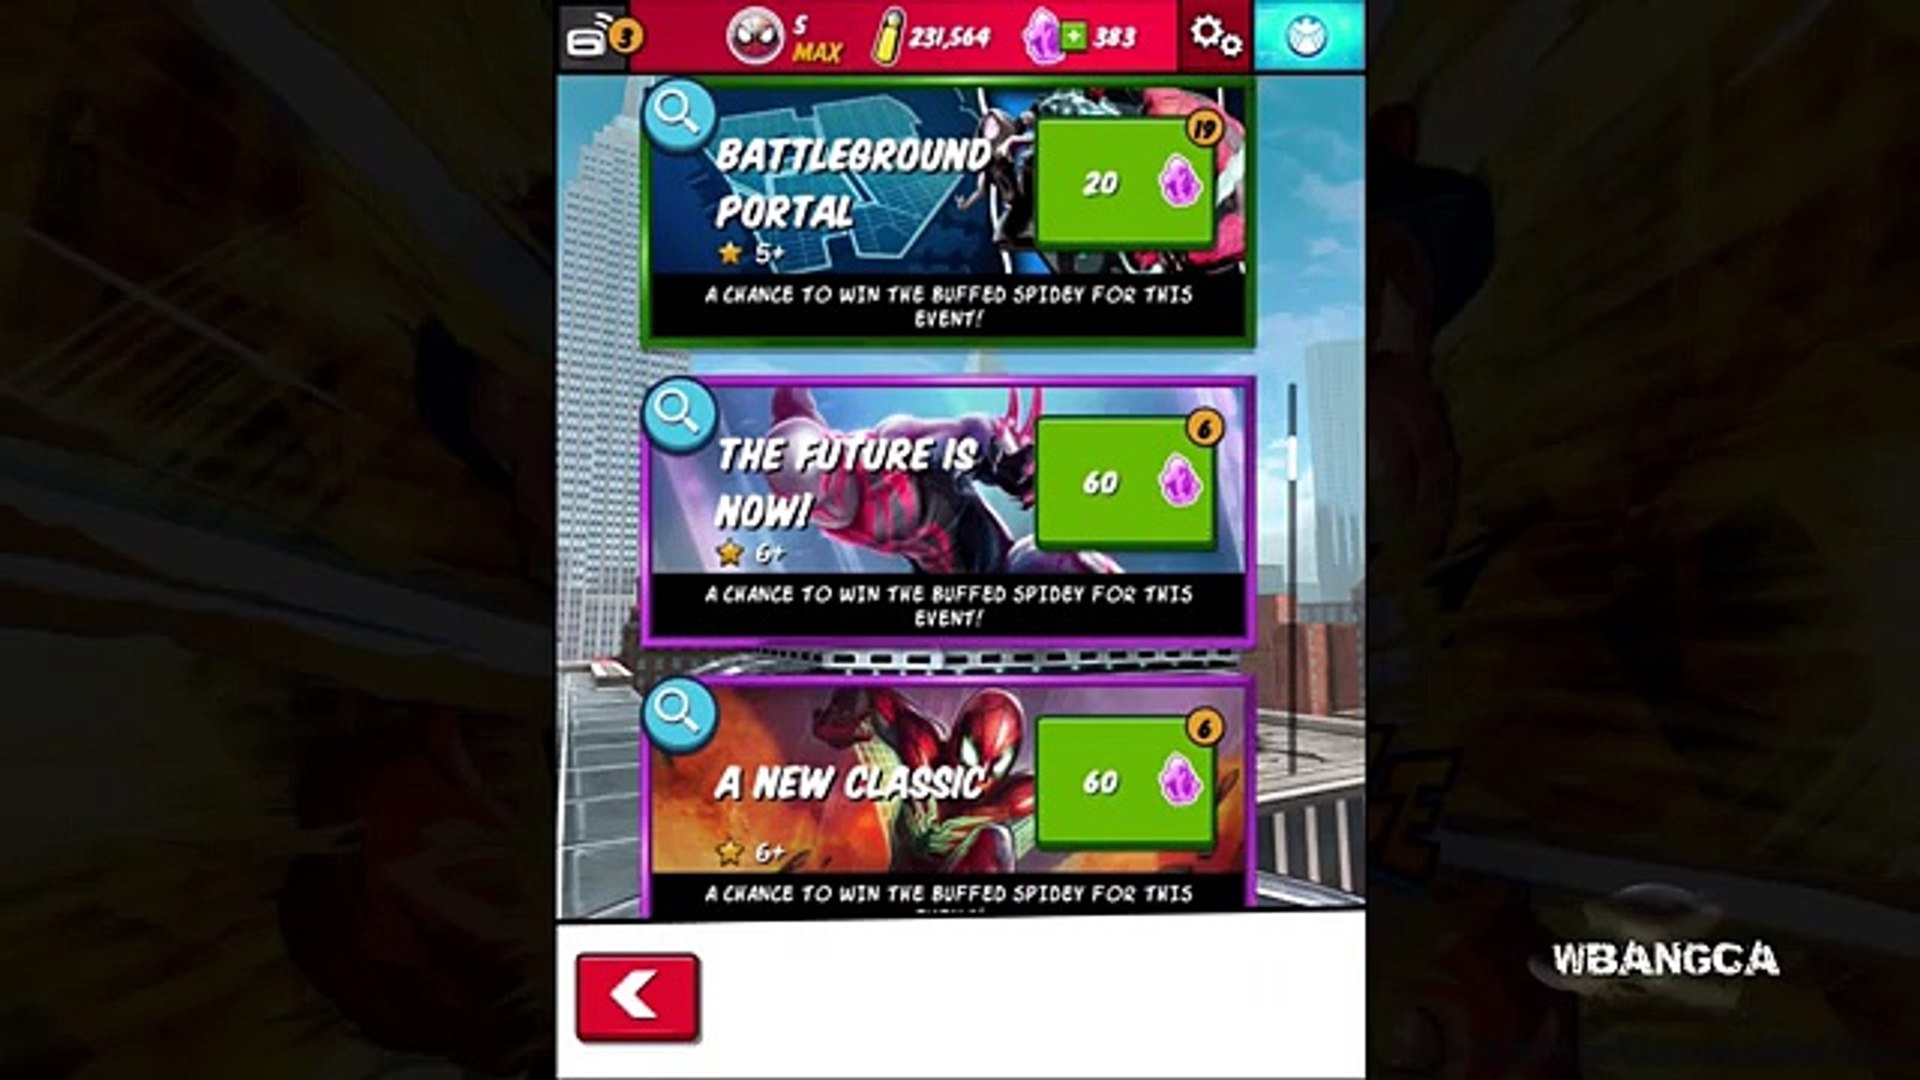 Spider-Man Unlimited: All-New Spider-Man 2099 Overview!